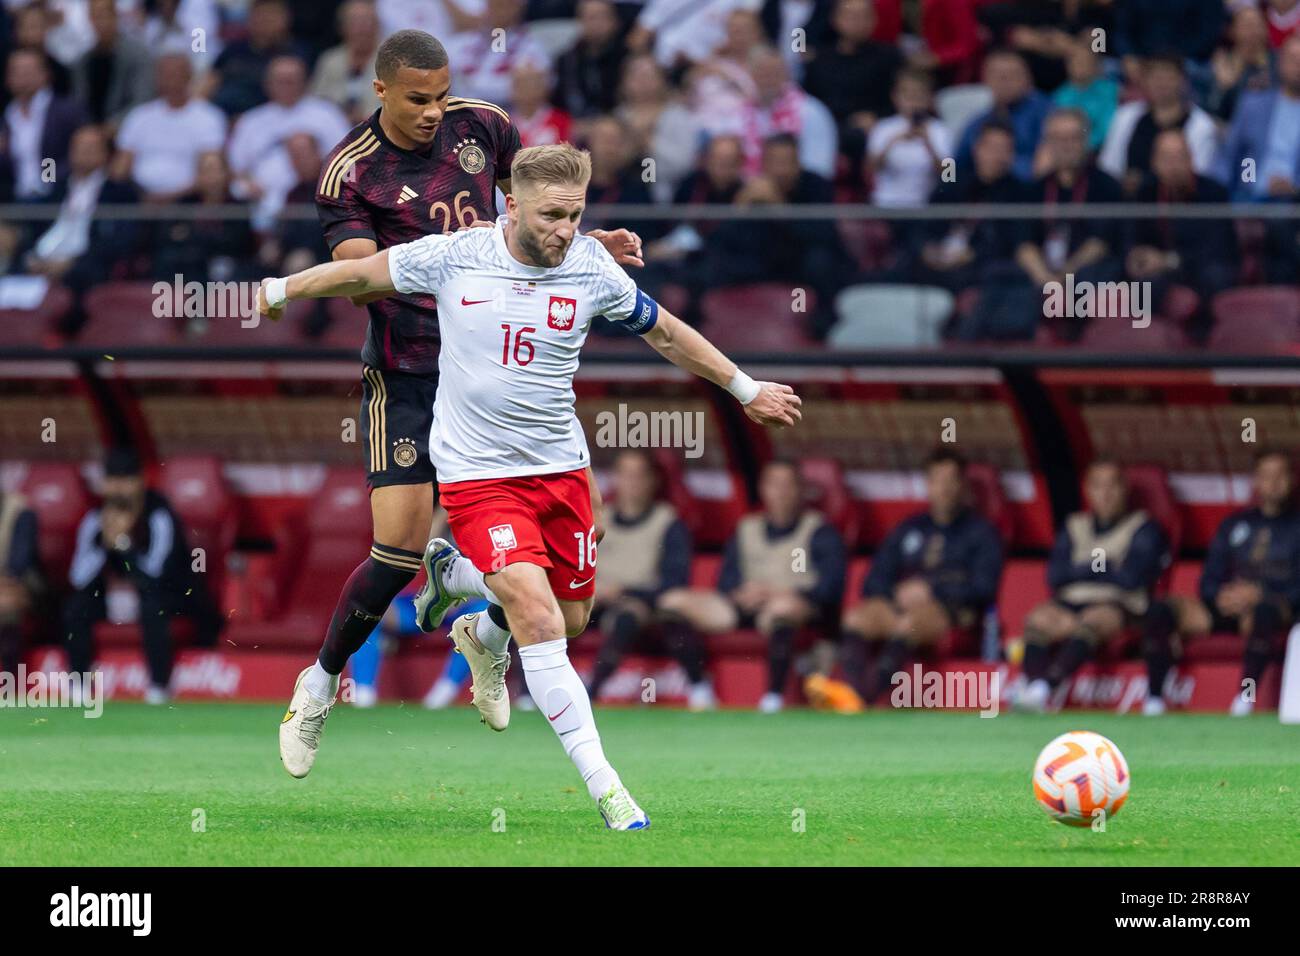 Malick Thiaw (L) of Germany and Jakub Blaszczykowski (R) of Poland in action during the friendly match between Poland and Germany at PGE Narodowy Stadium. (Final score; Poland 1:0 Germany) It was Jakub B?aszczykowski's last, 109th match for the Polish  football national team. Stock Photo